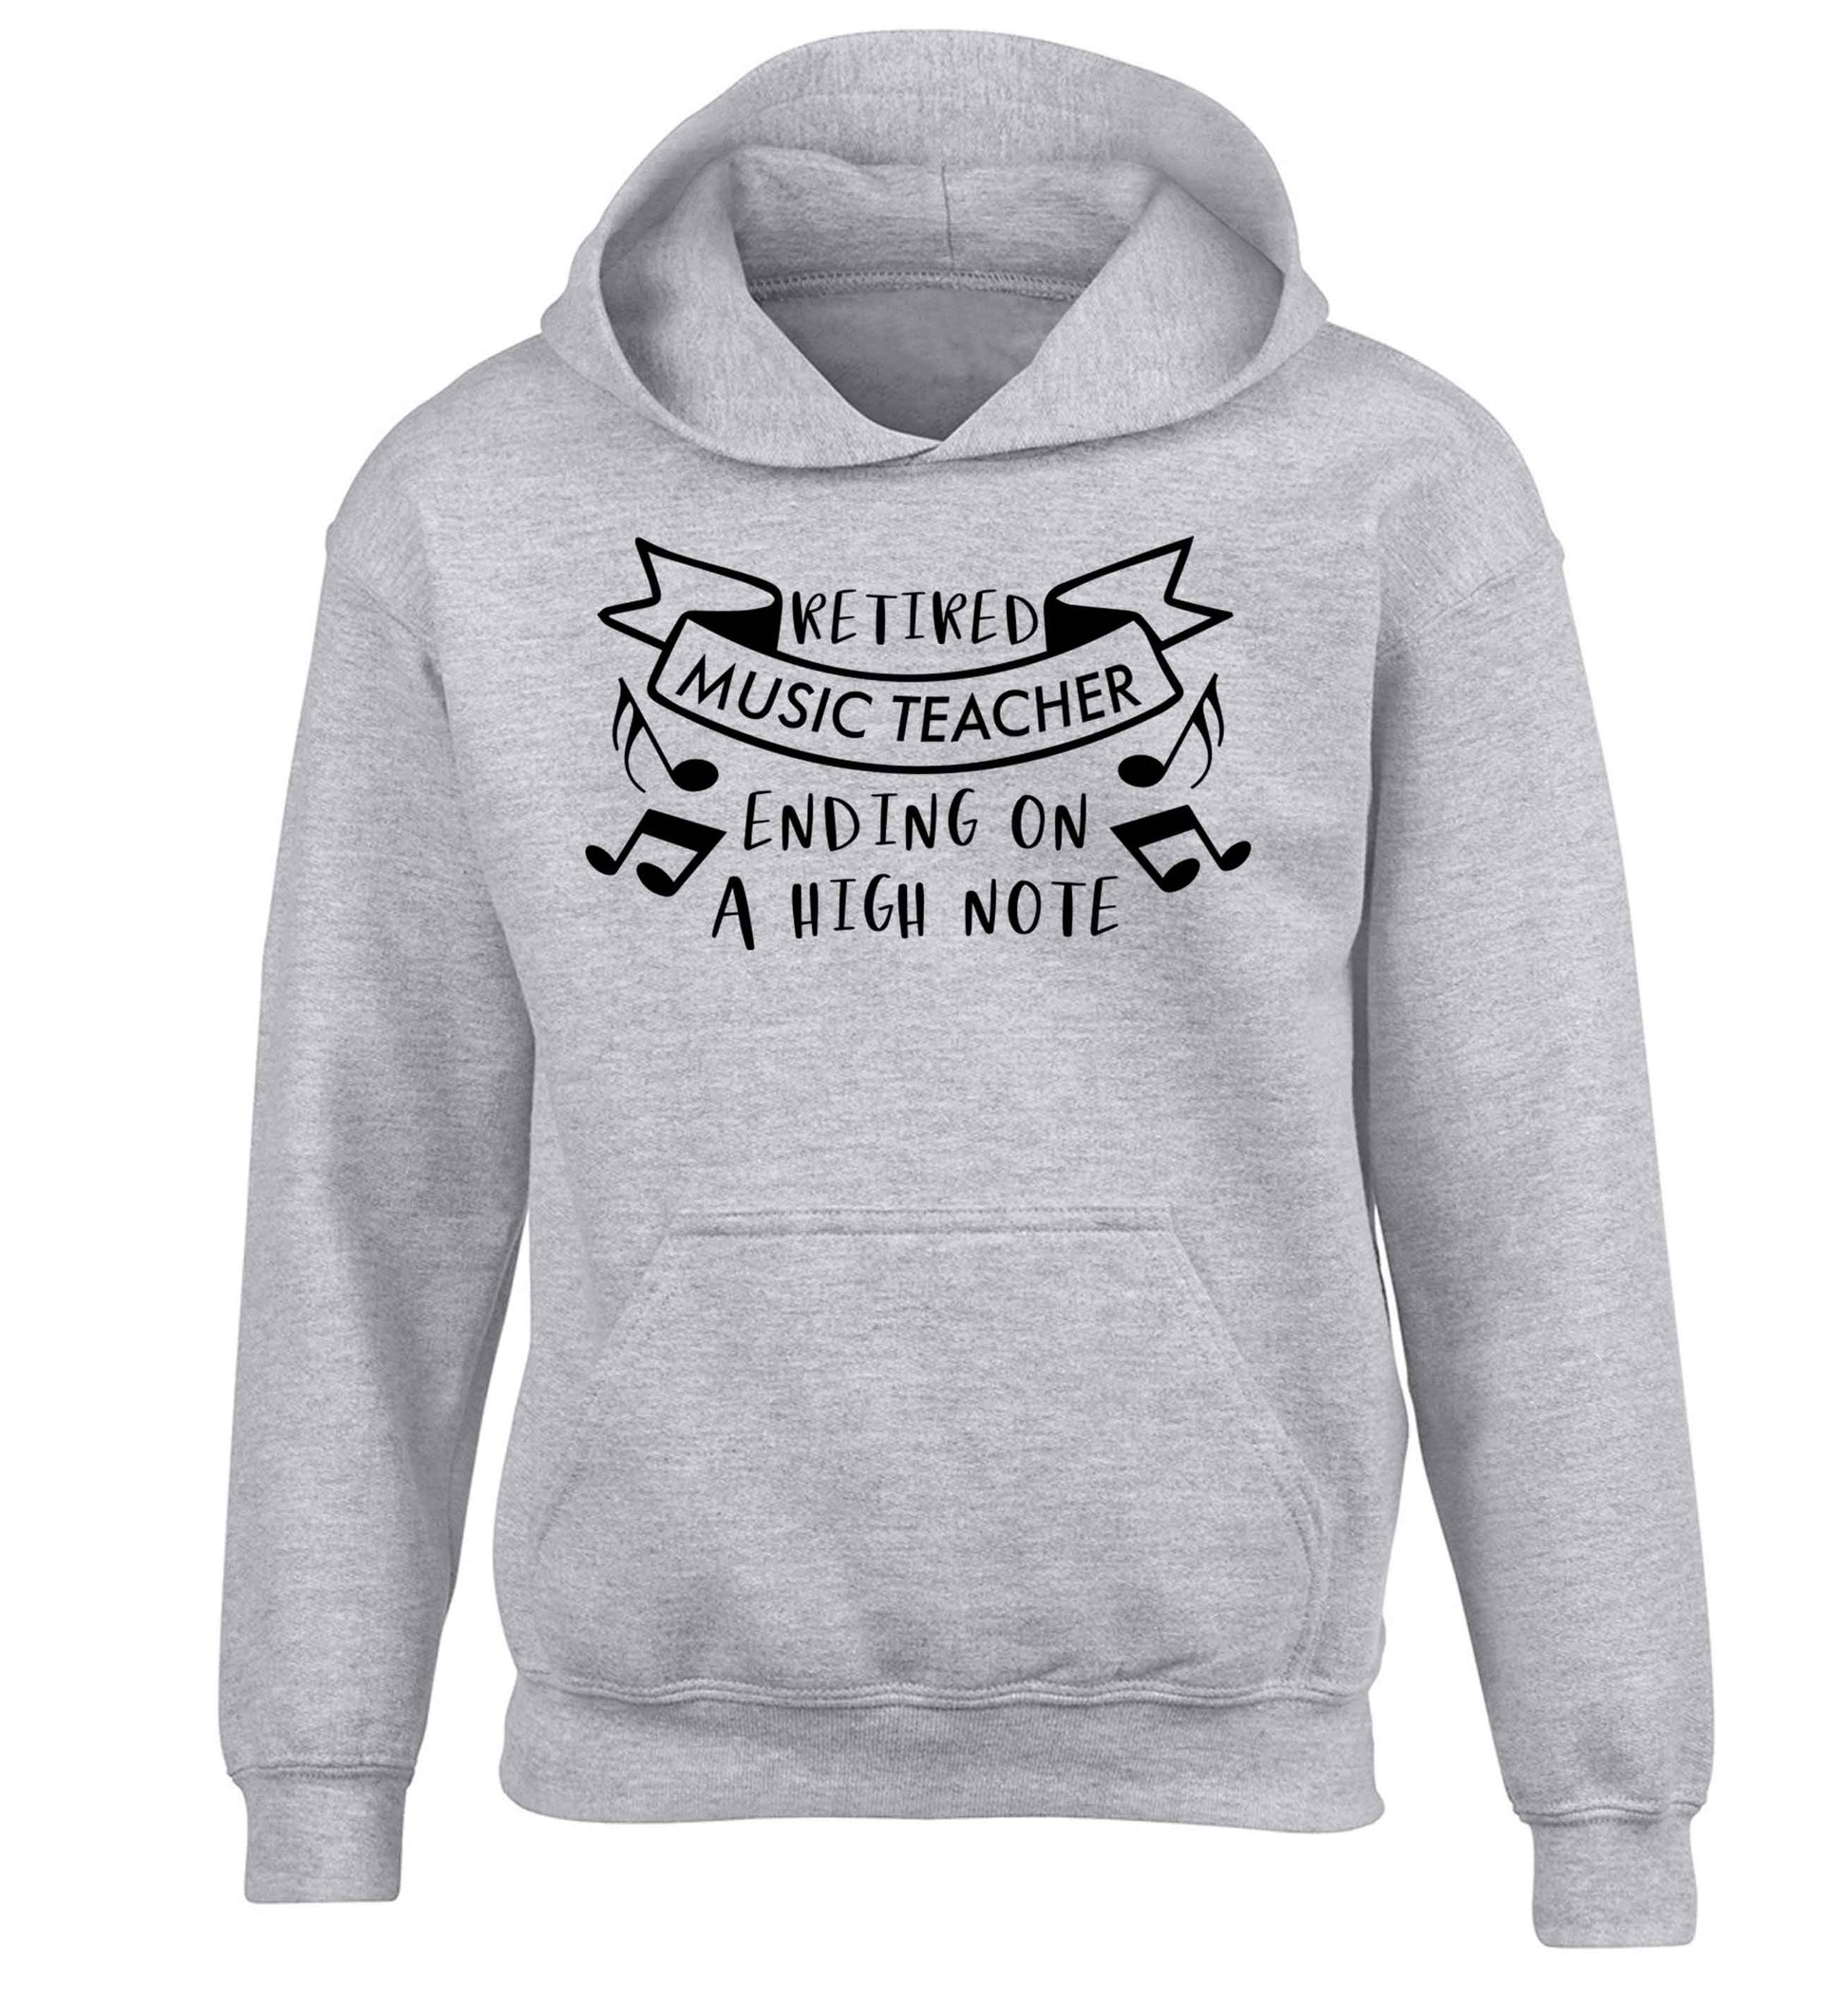 Retired music teacher ending on a high note children's grey hoodie 12-13 Years